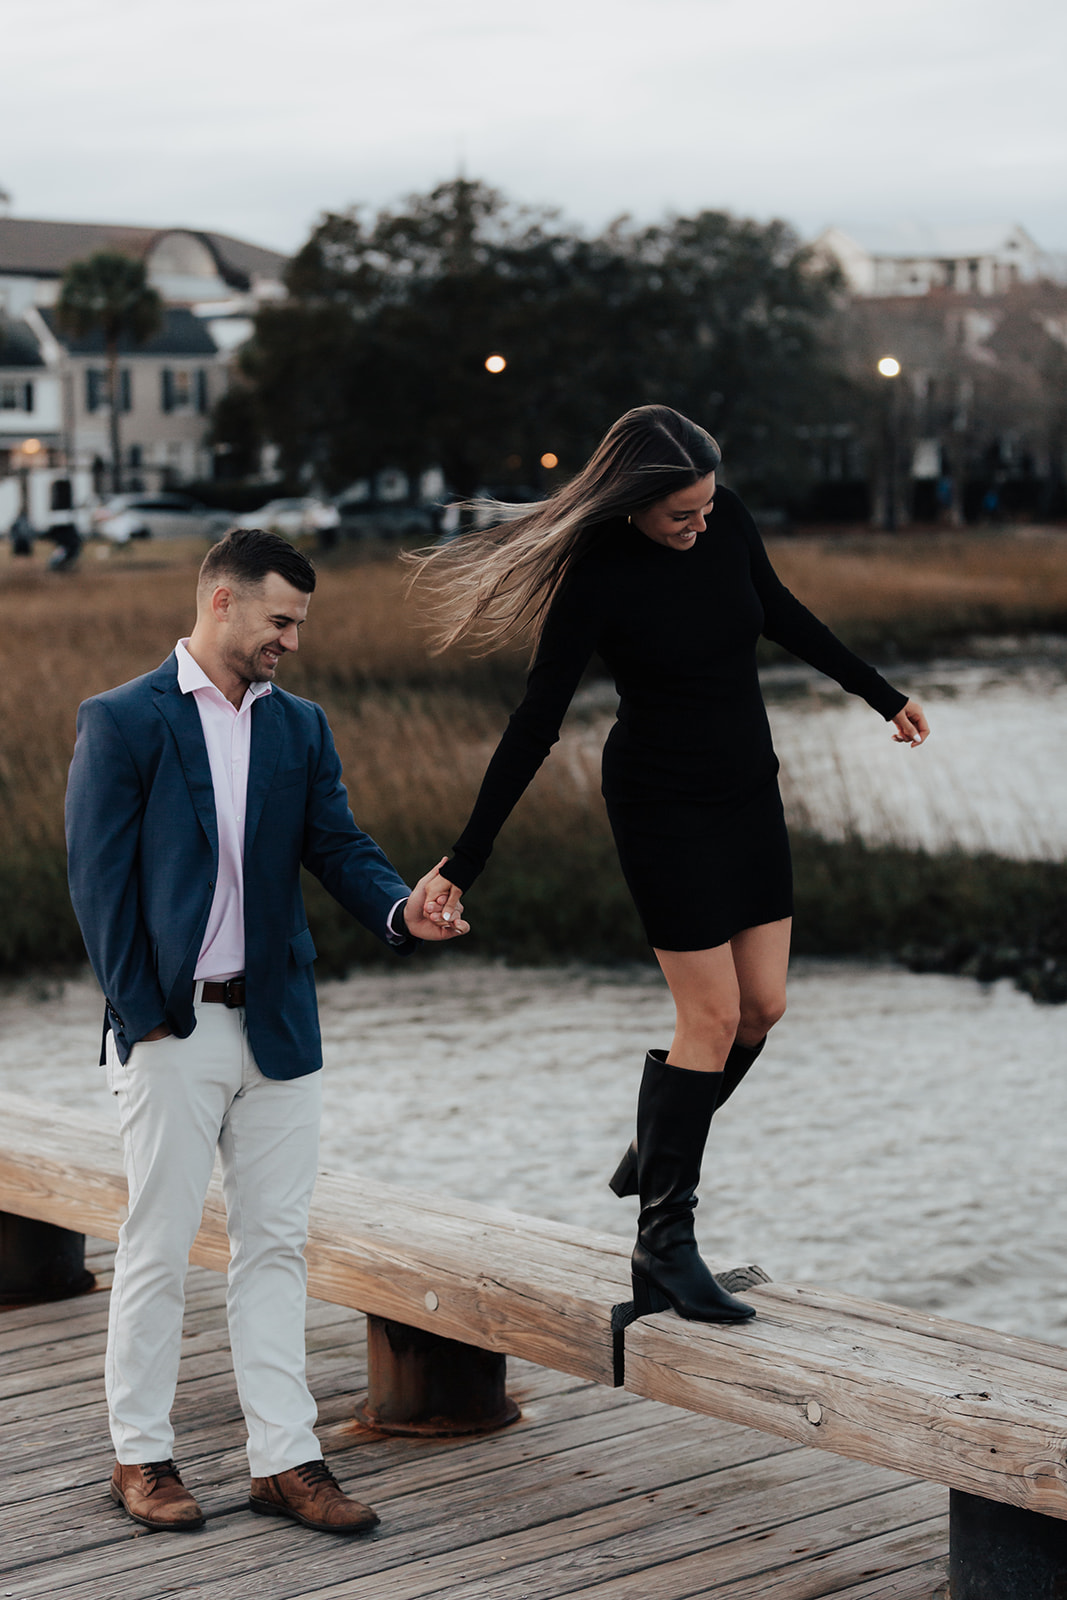 Playful balancing at public pier in Charleston during engagement photo session